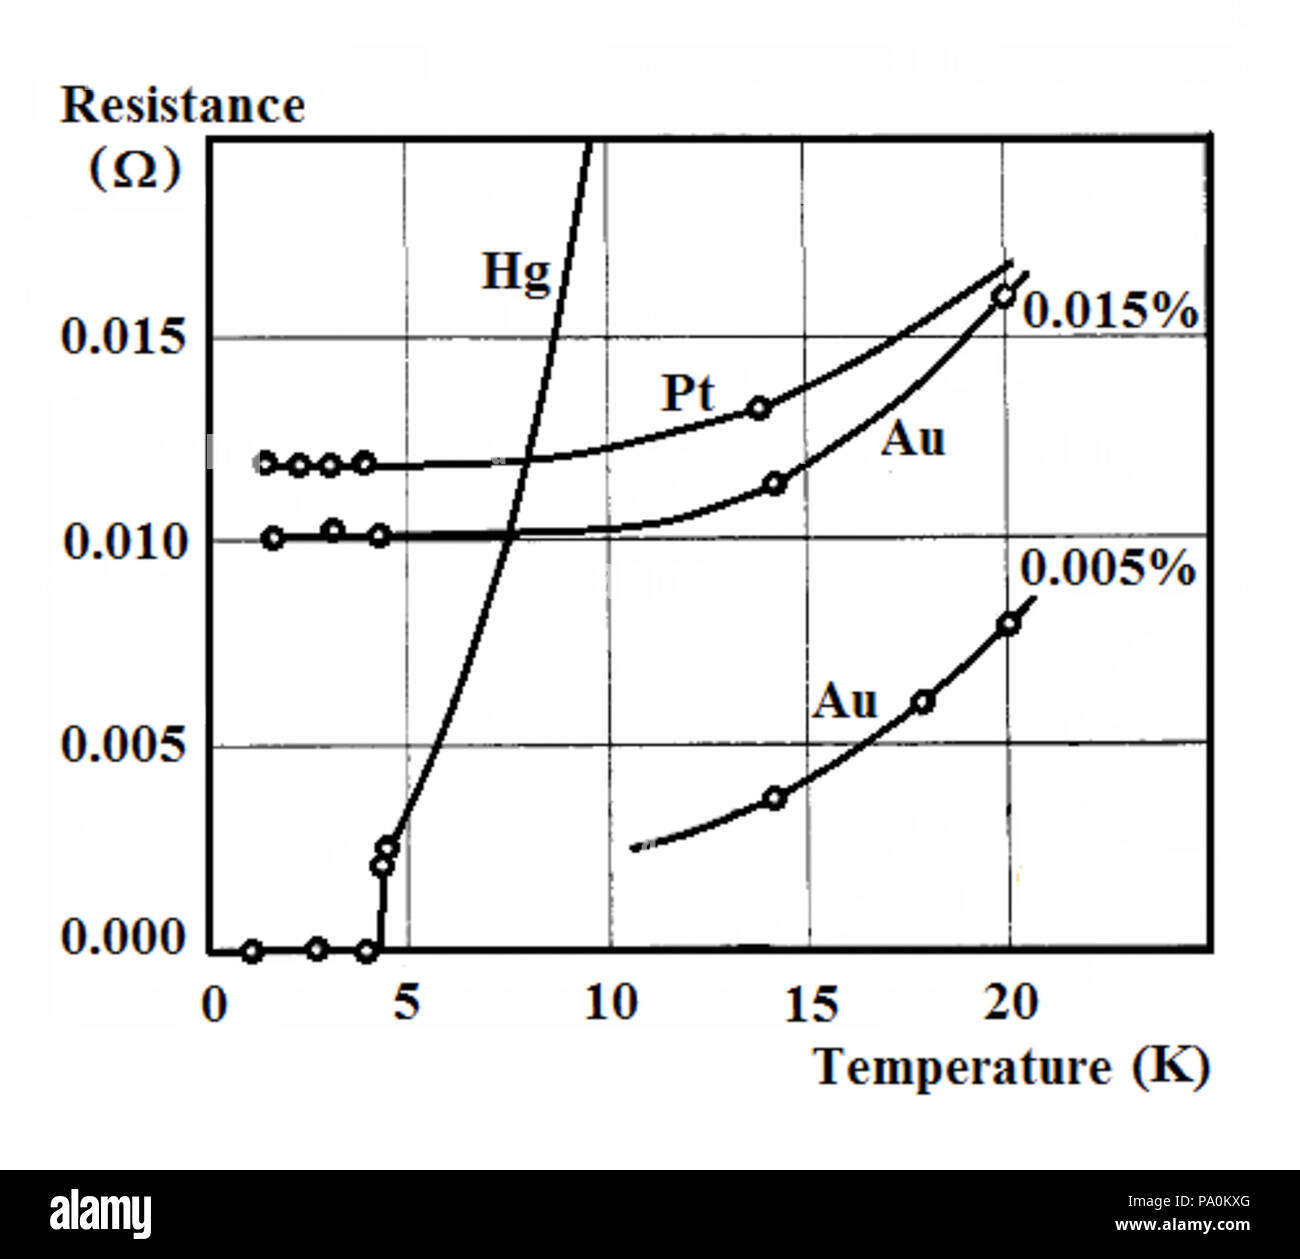 613 Electrical Resistance Vs Temperature Stock Photo